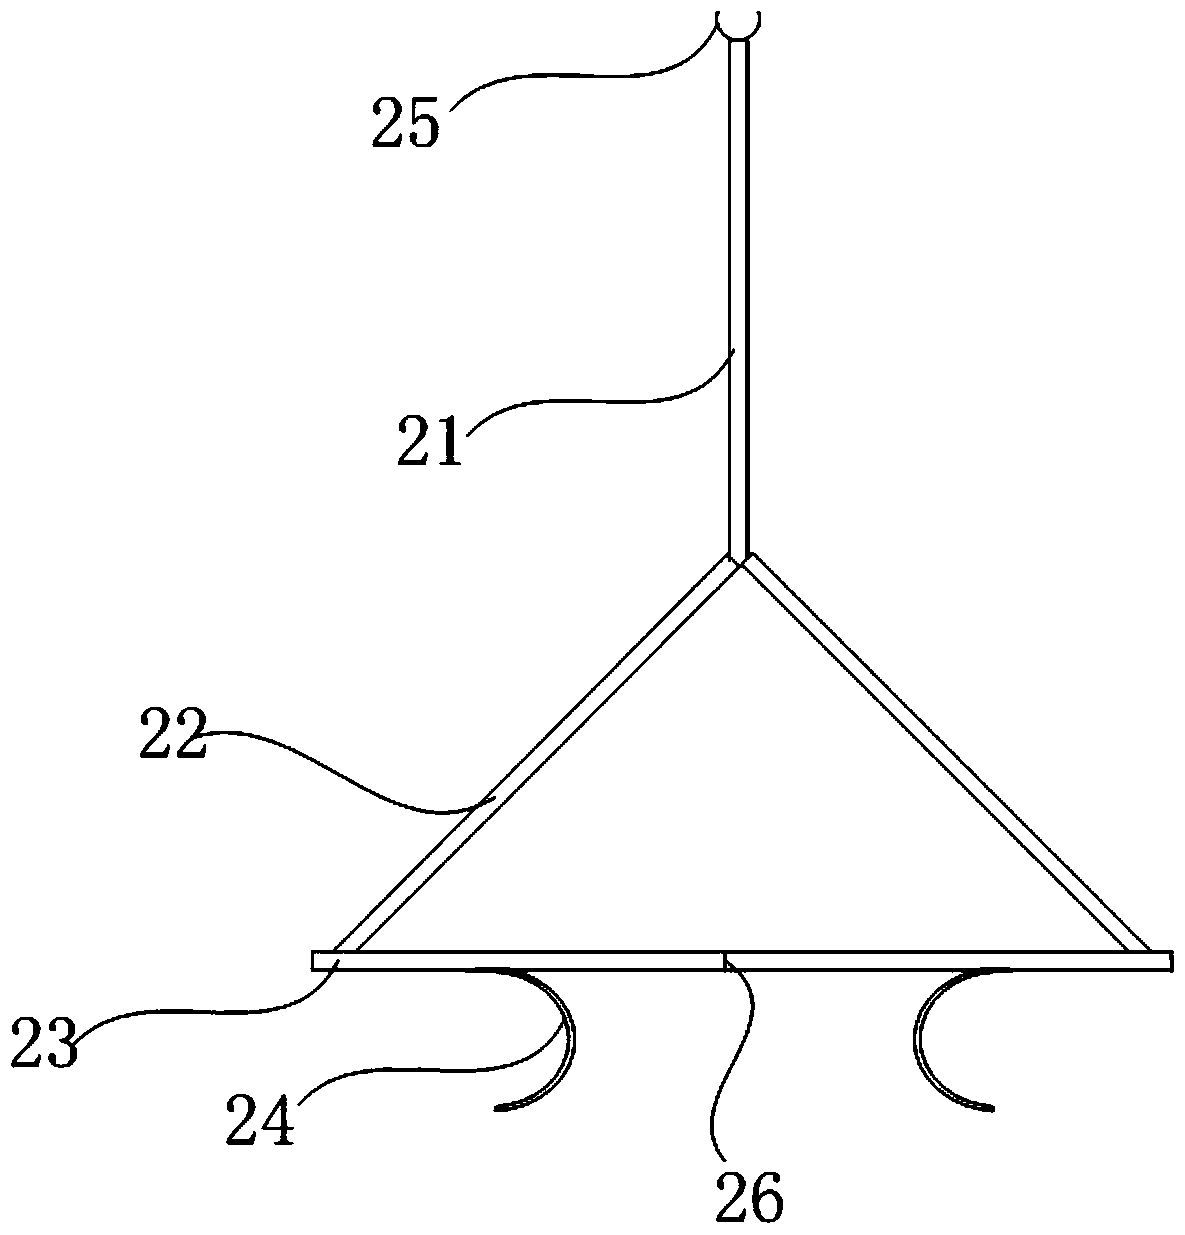 A charged water washing method for tension insulator strings